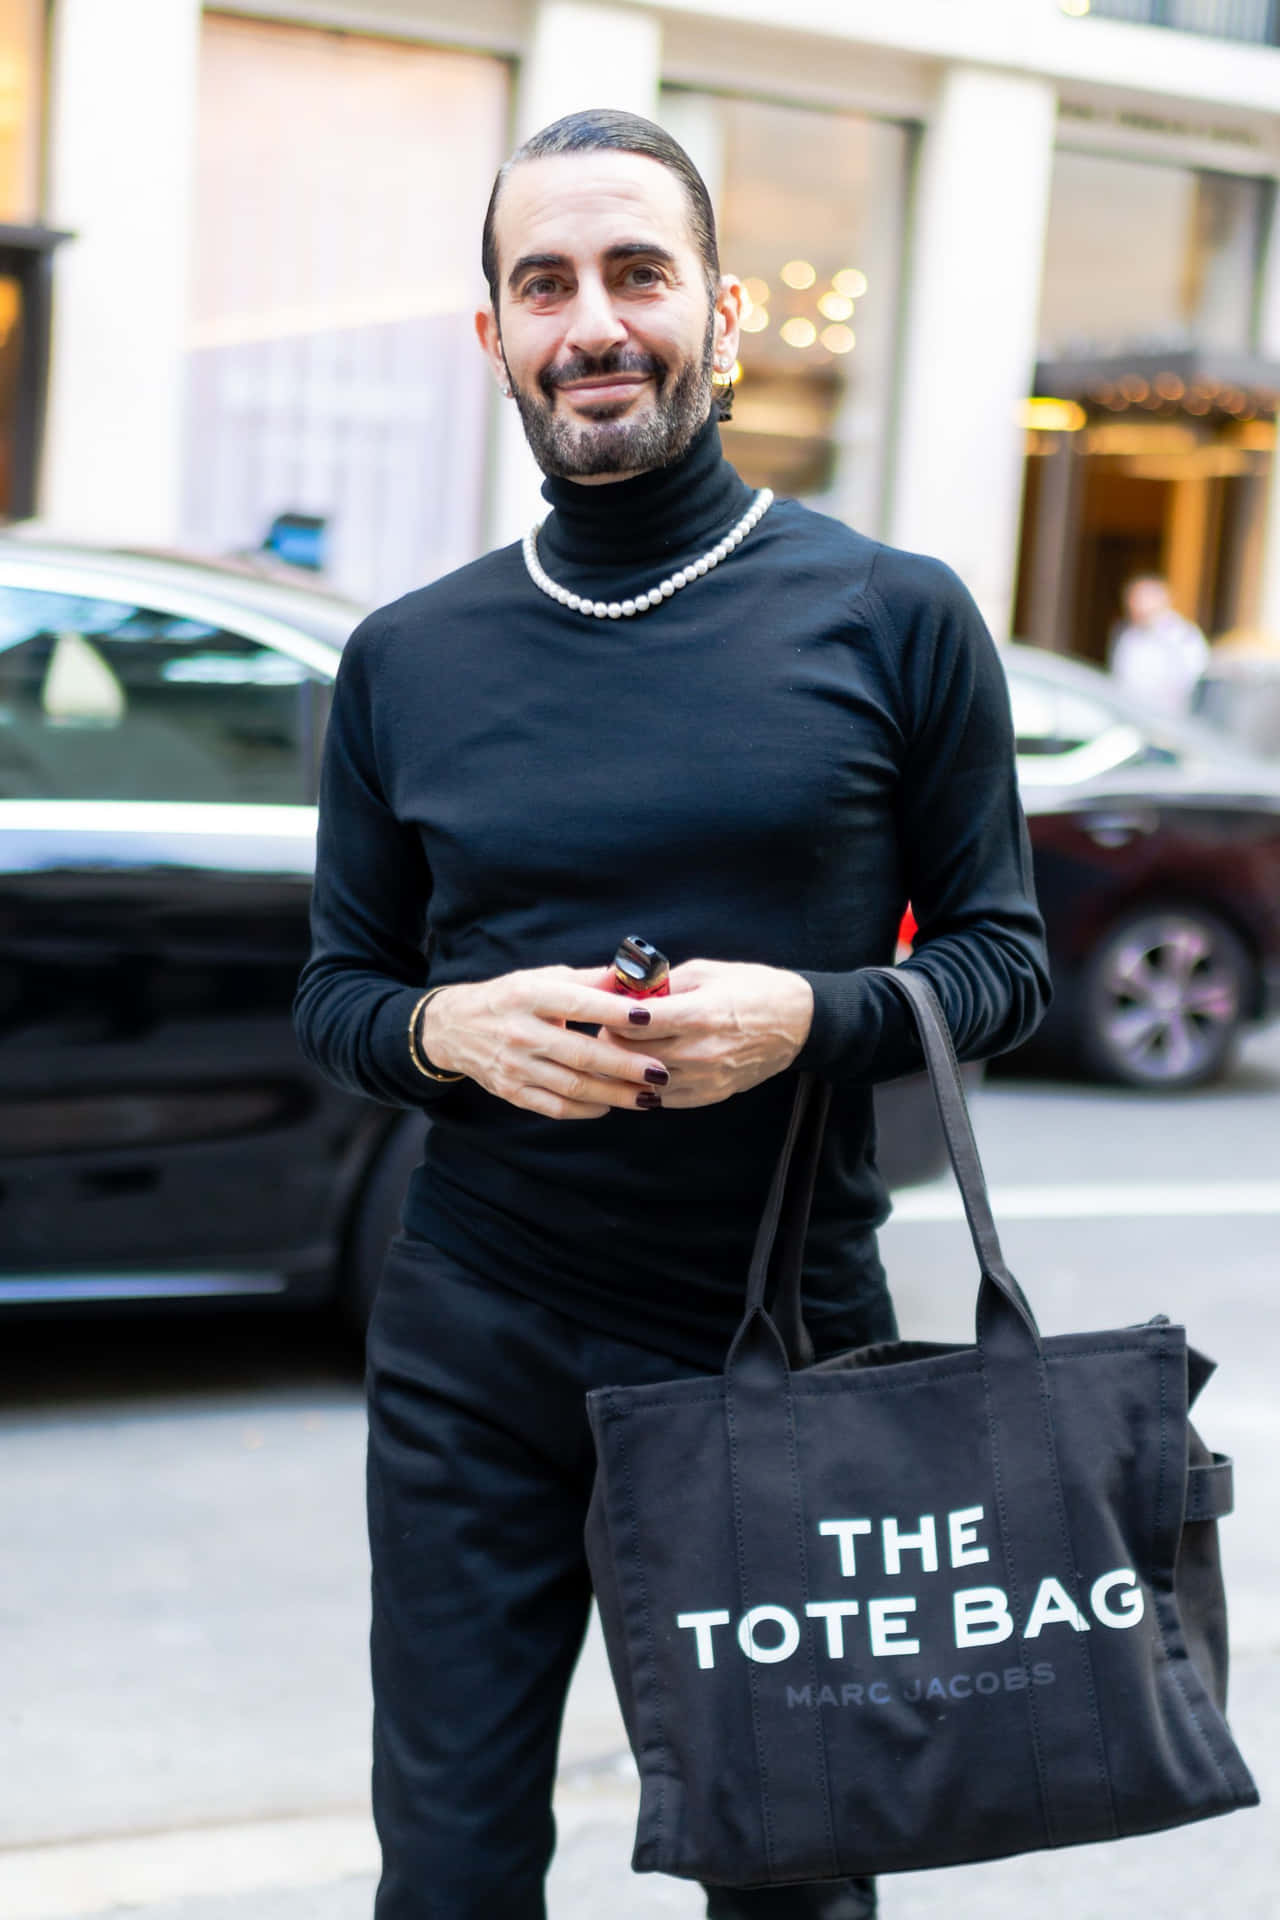 " Marc Jacobs embraces the power of change."